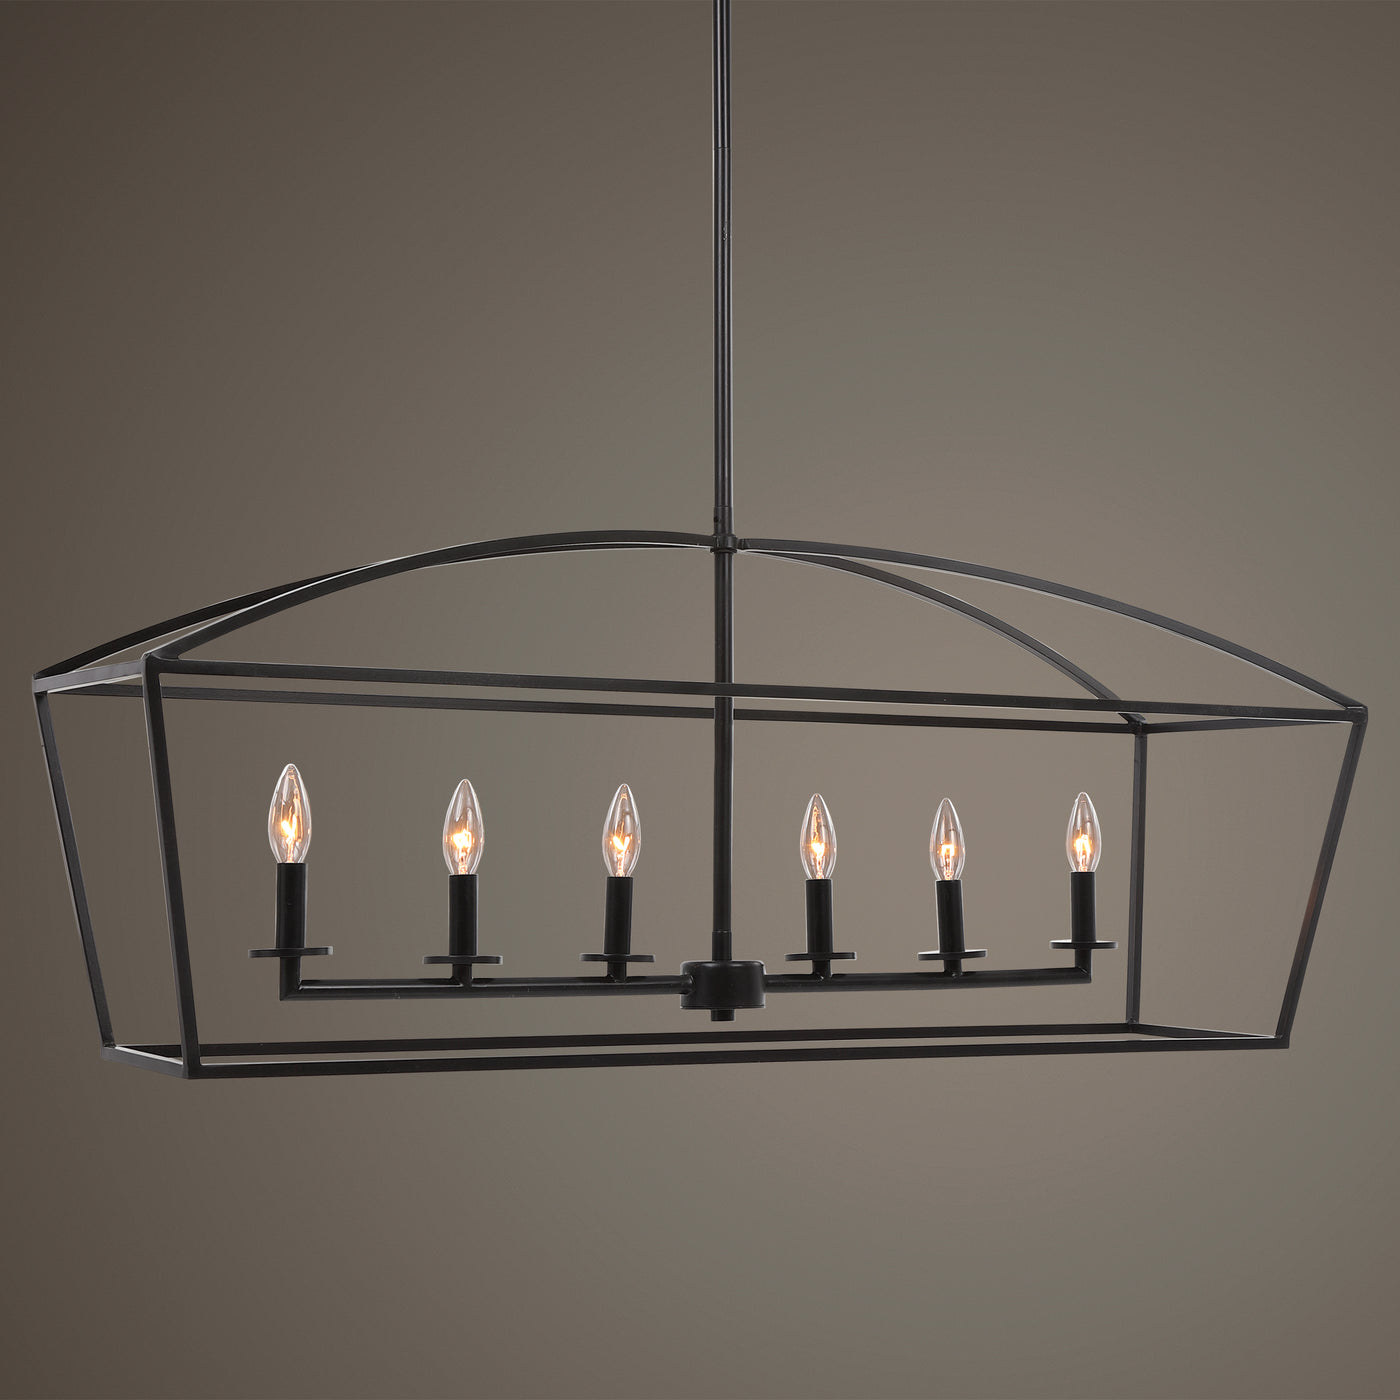 Simple Clean Open Frame Lines Are The Focus Of This Vintage Farm Industrial 6 Lt.  Linear Chandelier. The Deep Dark Weathe...